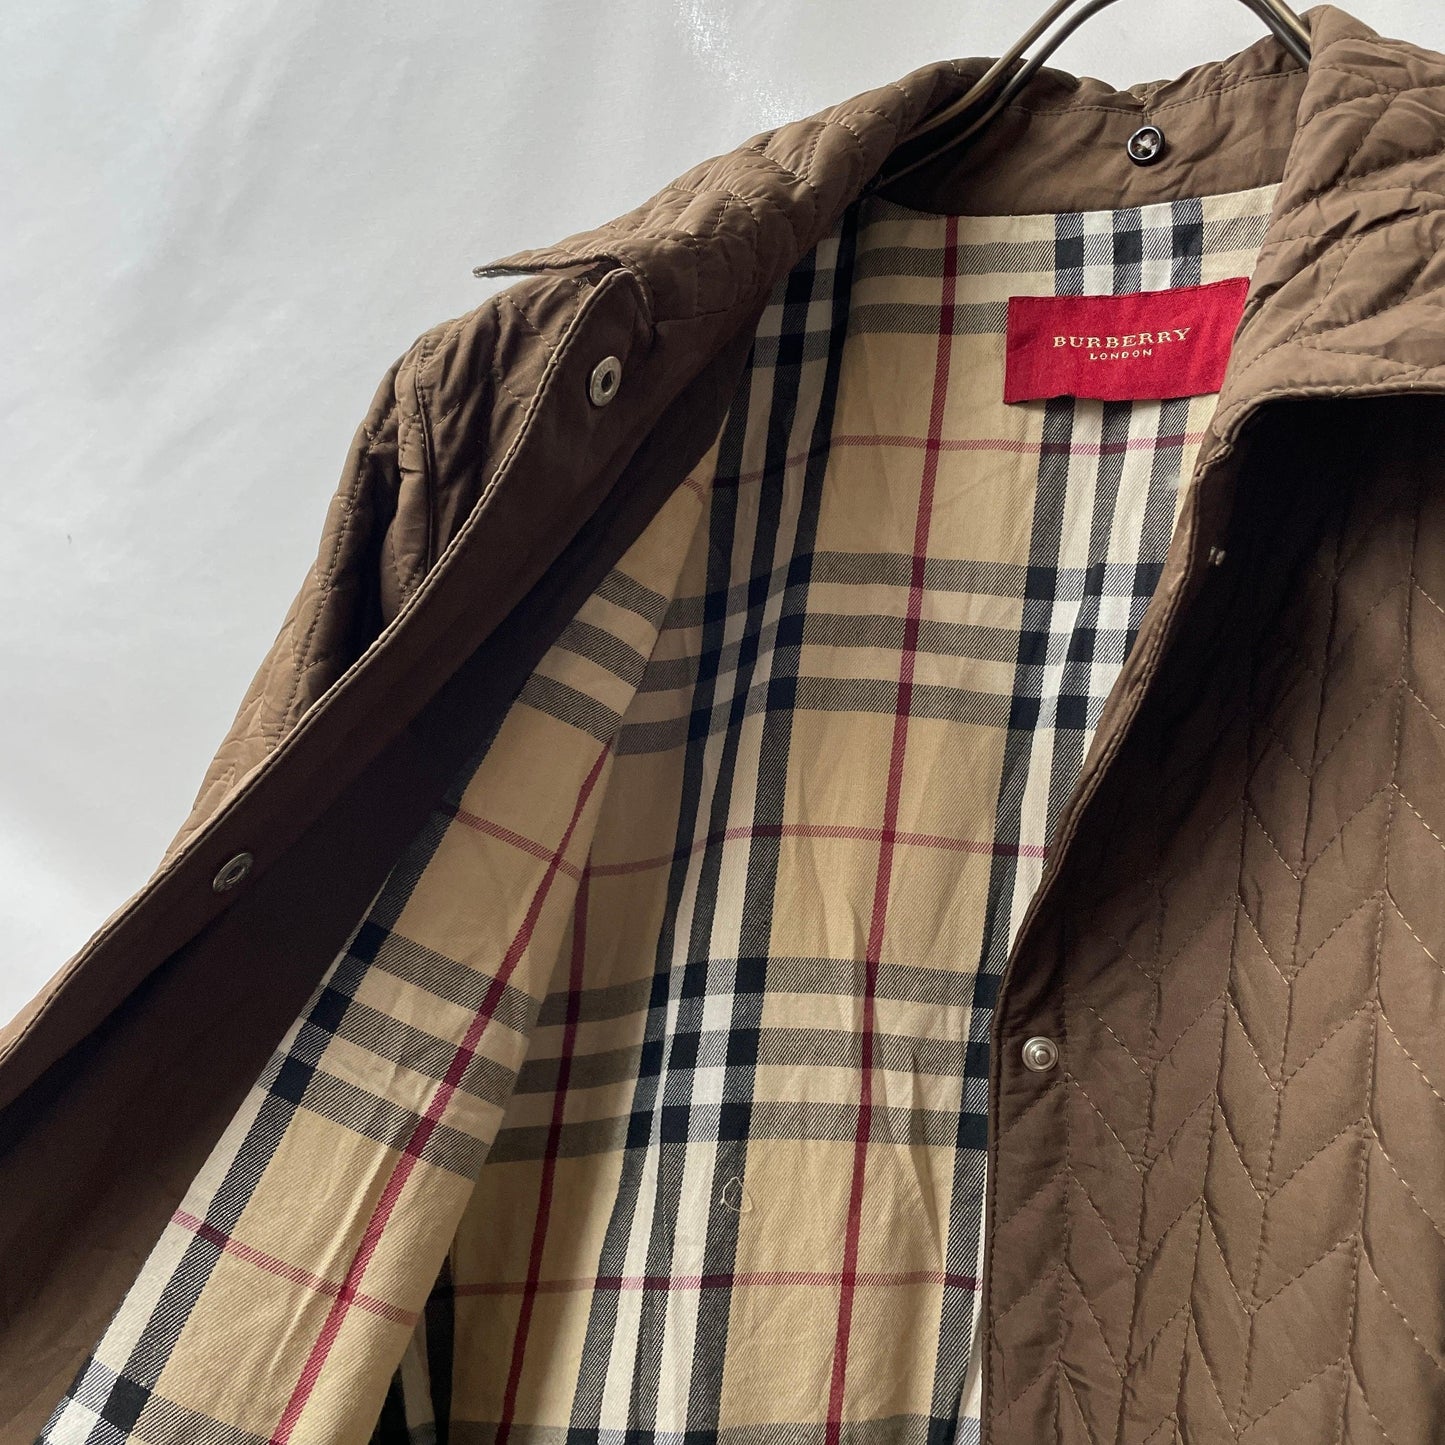 00s burberry london coat burberry made in spain